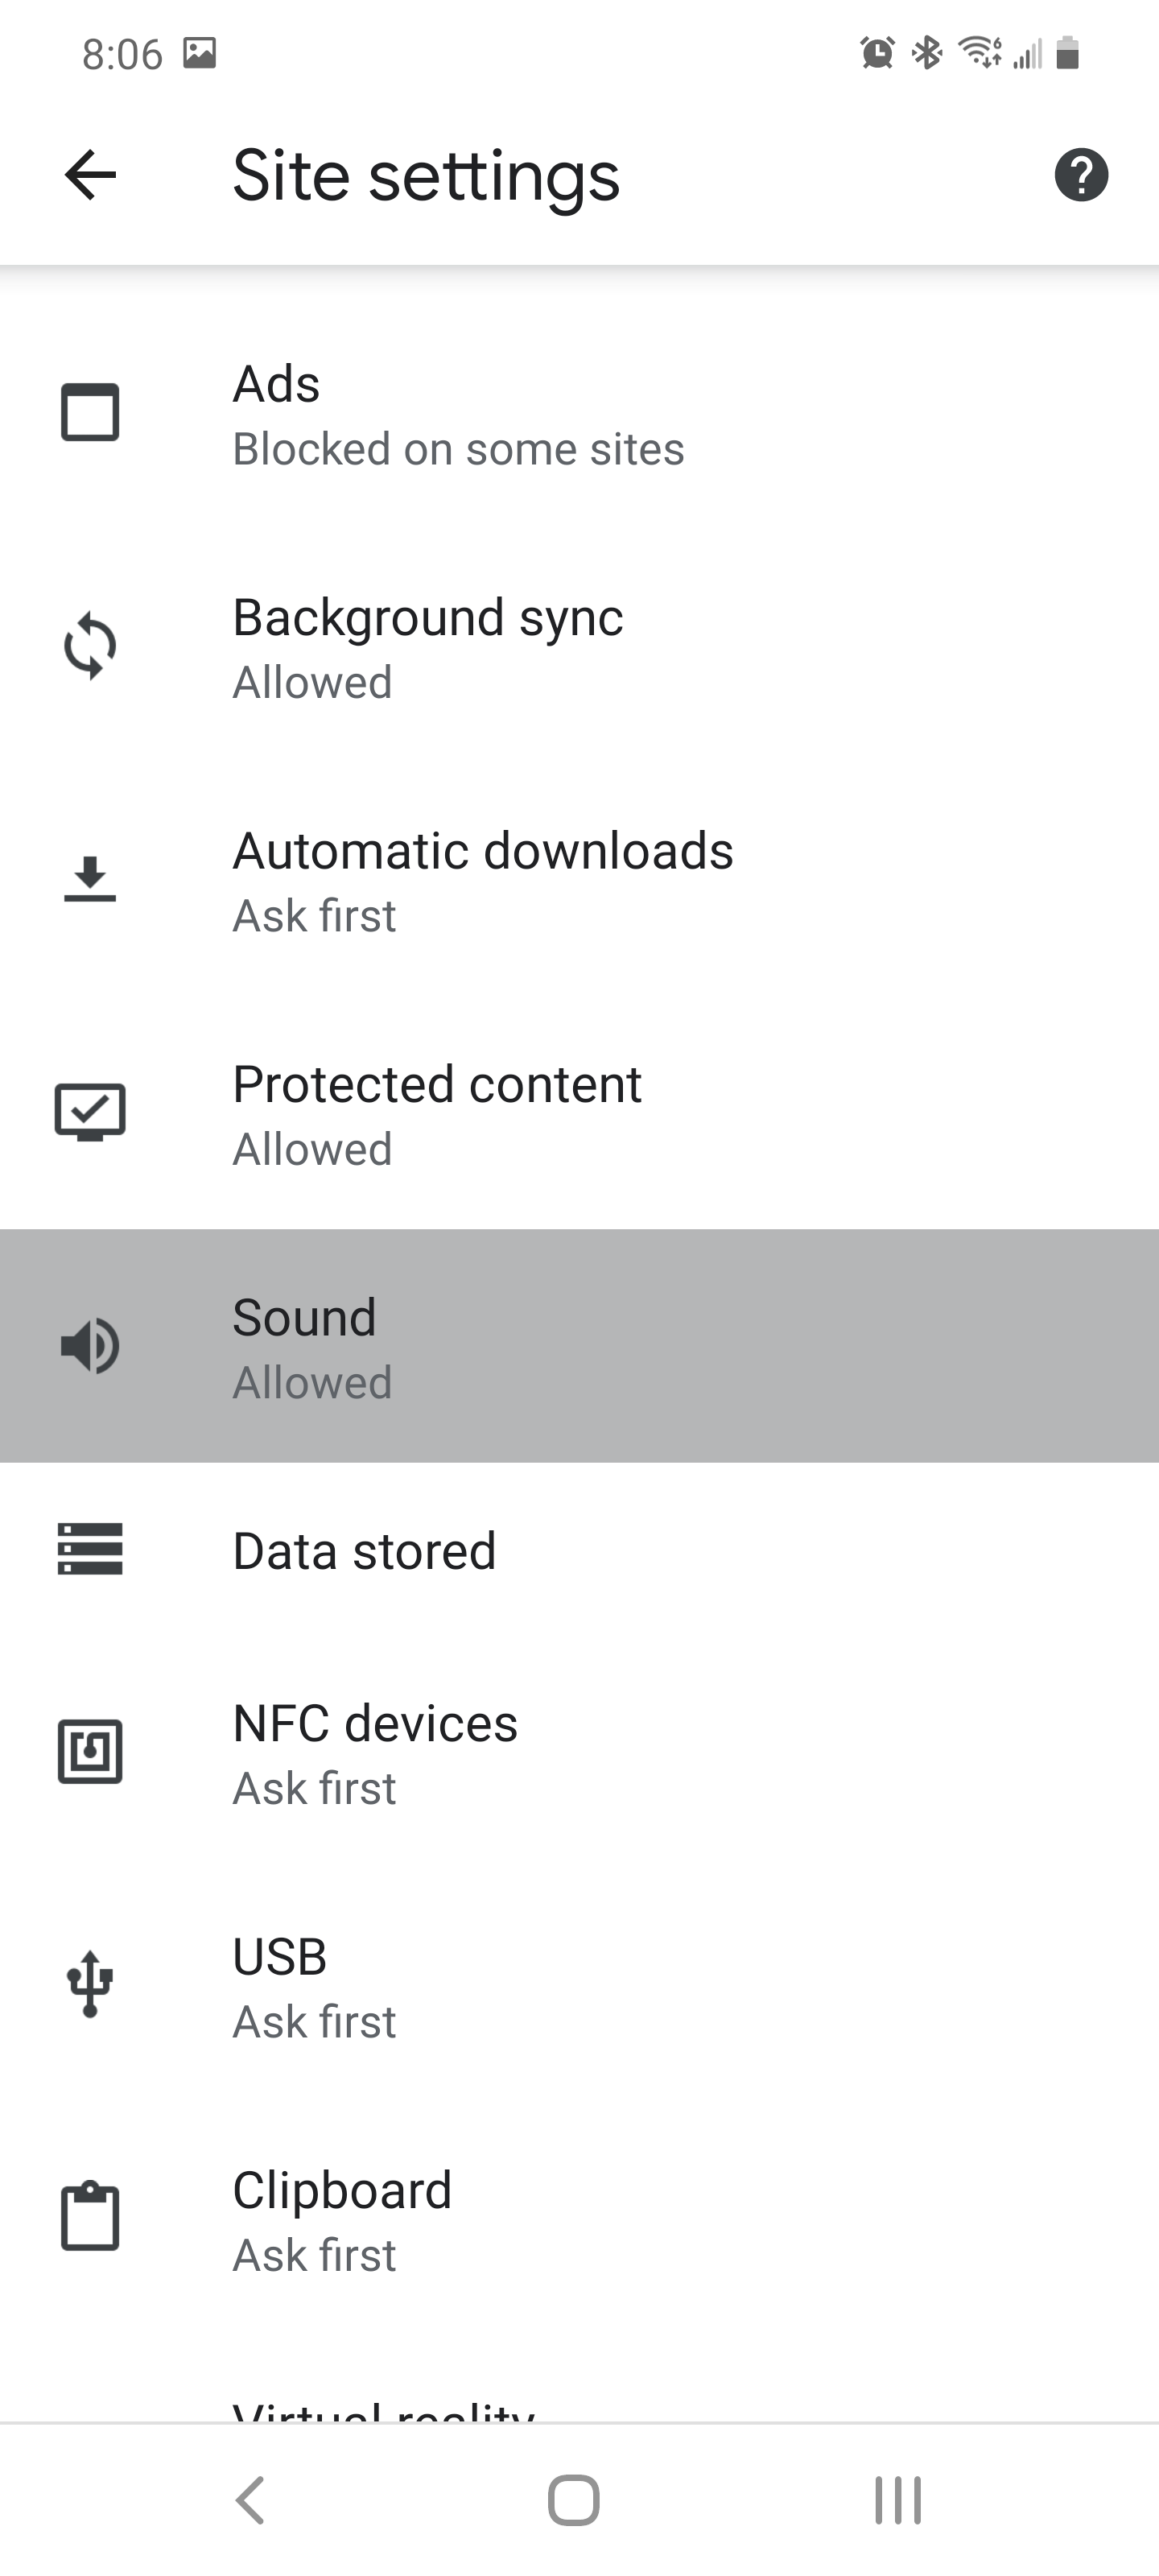 The Site settings menu in Chrome for mobile with the Sound option highlighted